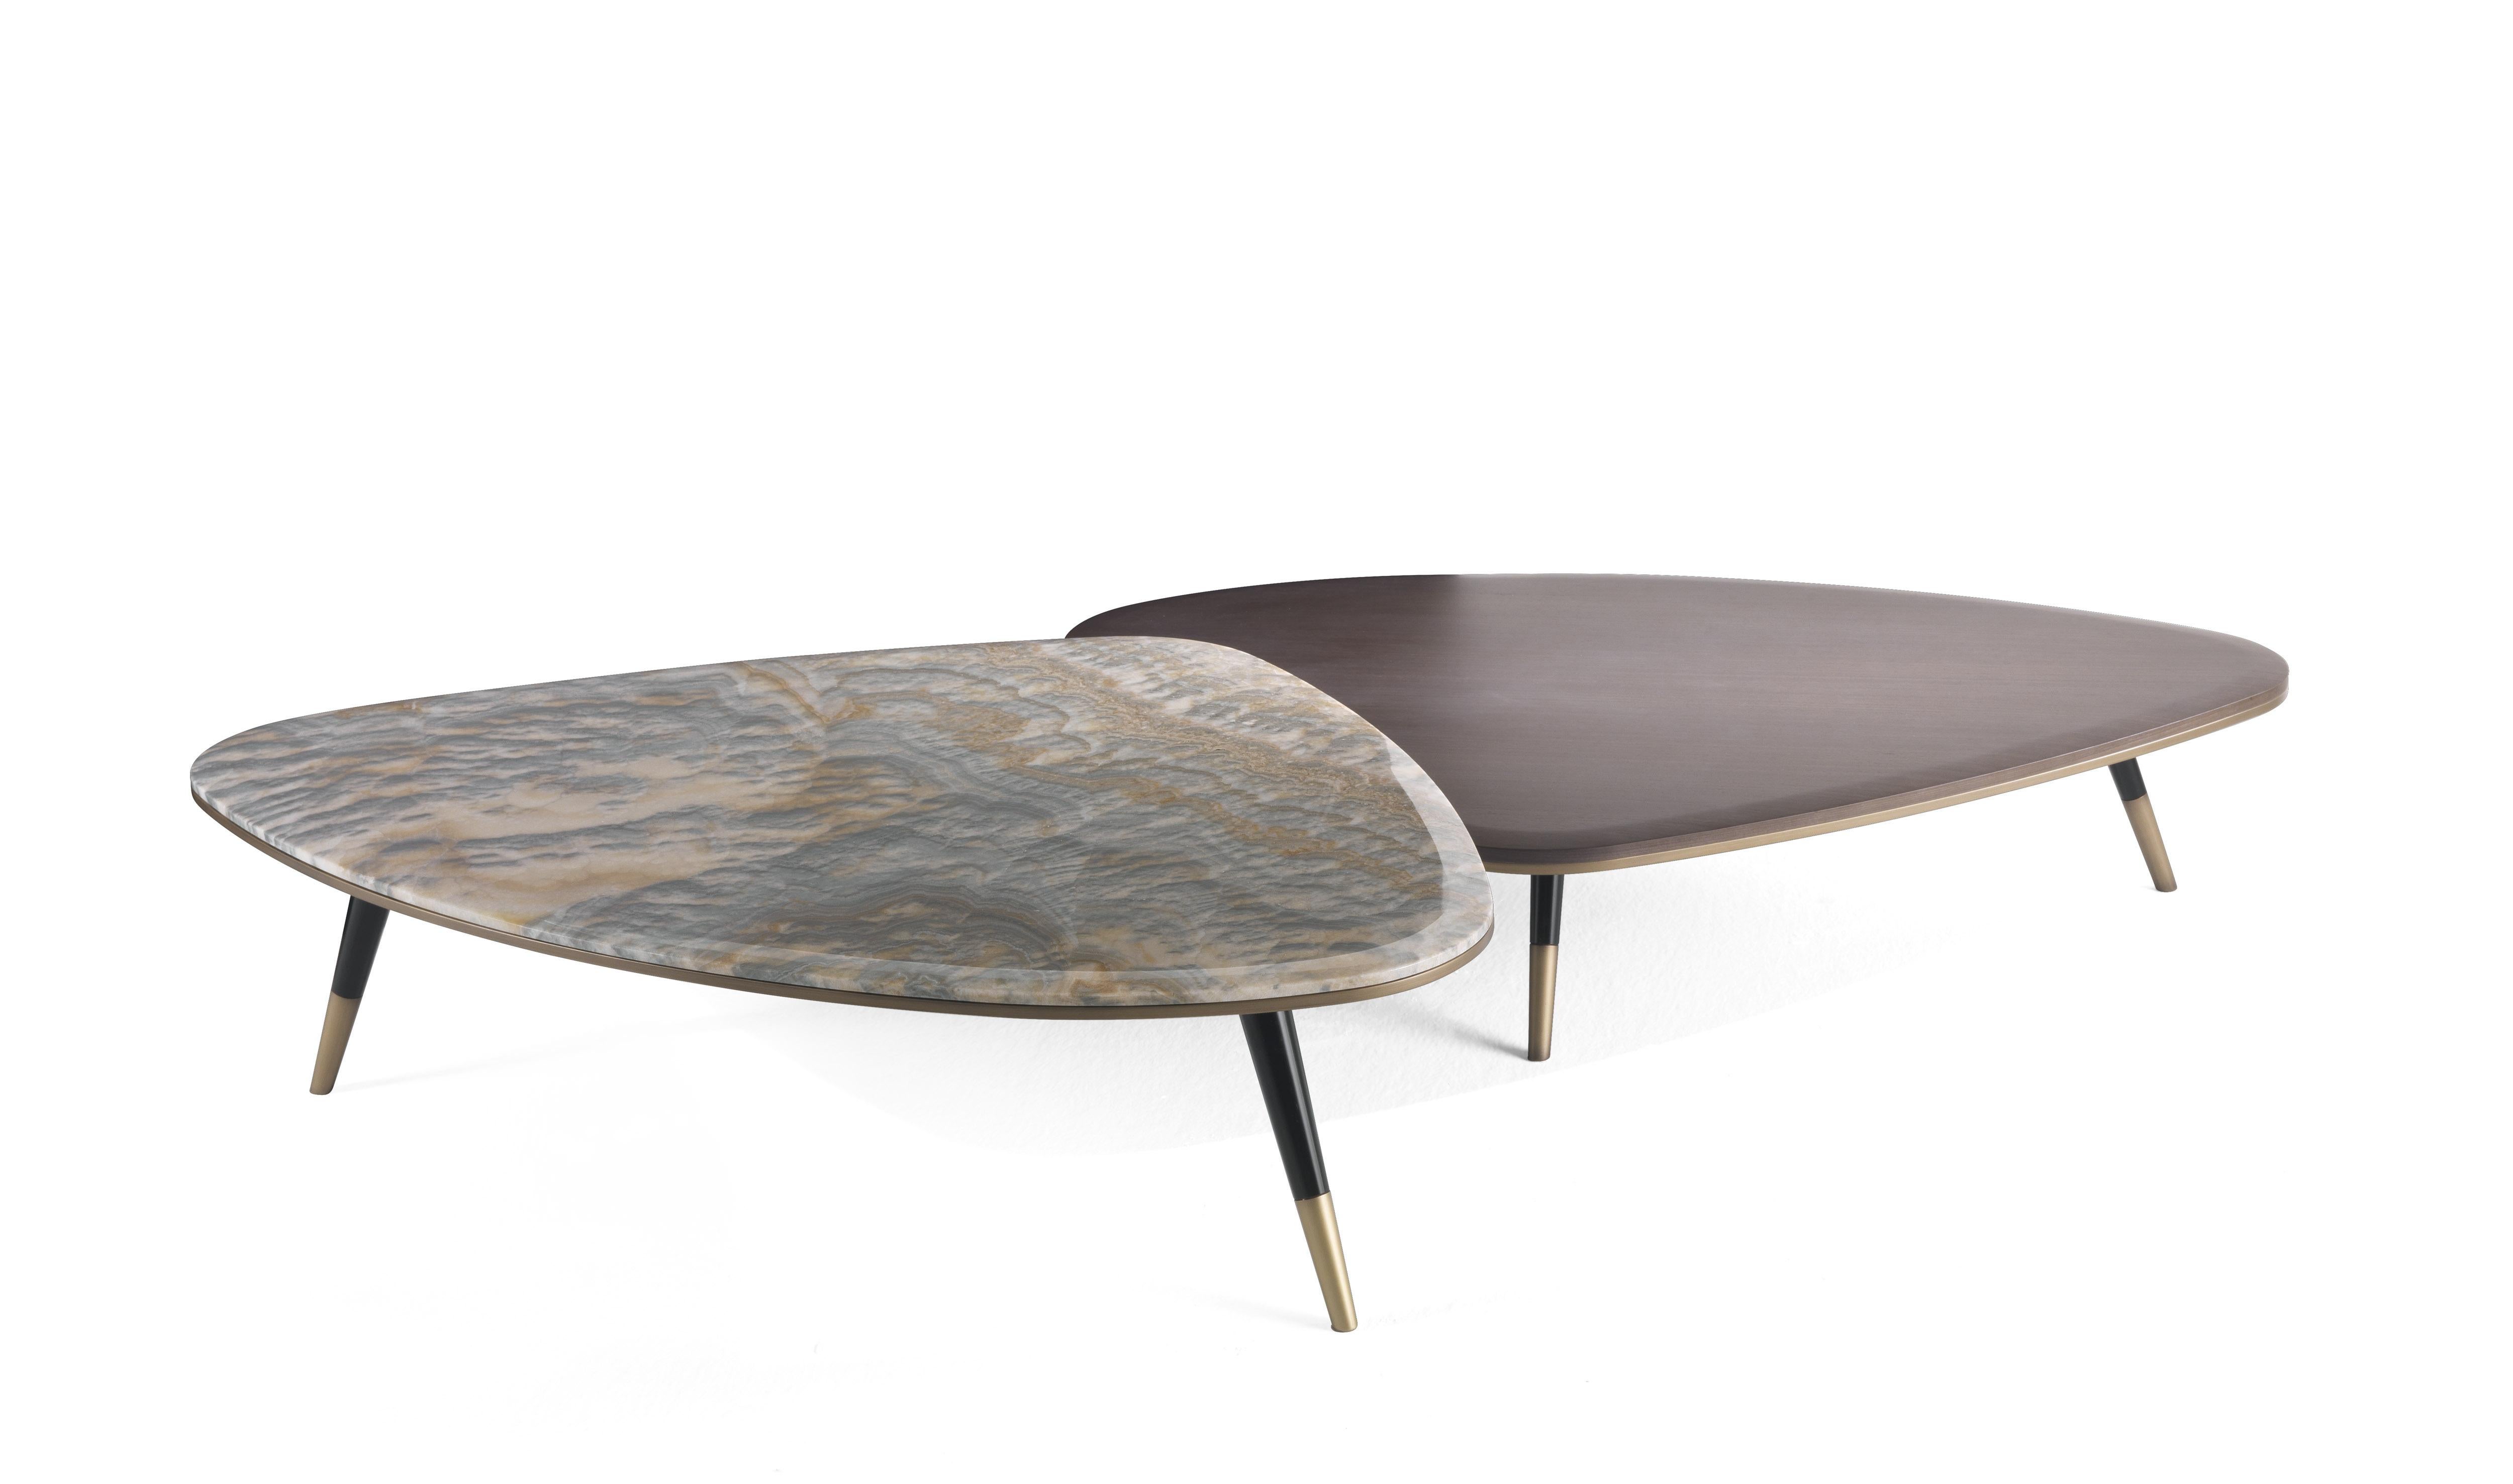 Inspired by the 1950s and characterized by oblique legs, brass caps and profiles, curved top with an irregular shape, Camberwell tables allow you to create unique compositions thanks to the different heights and materials available for the top, such